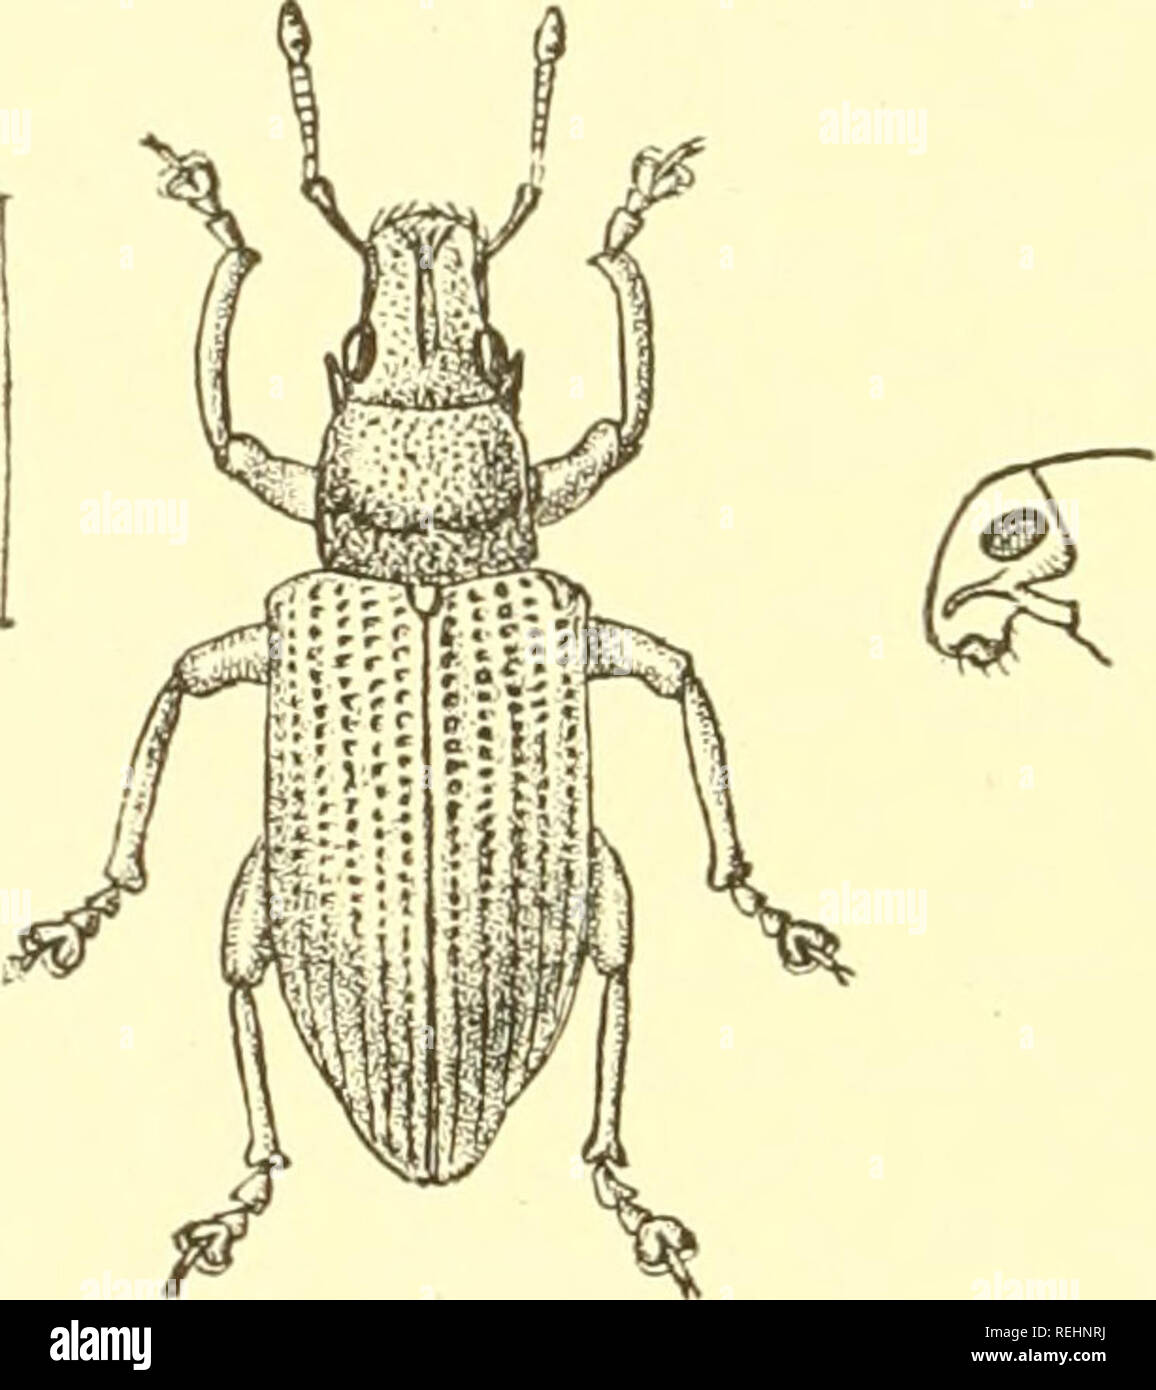 . Coleoptera. Rhynchophora:-Curculionidæ,. Curculionidae. 120 CUBCULIONID^. 82. Dereodus denticollis, Boh. Dereodus denticollis, Boliemaii,* Sclionb. Gen. Cure, ii, 1834, p. 73. Colour black, with grey scaling, baviug a lilac flush on the upperside, the prothorax with three narrow indistinct yellowish stripes. Head convex, shallowly punctate and wrinkled, with a broad deep central furrow ascending to the vertex ; eyes large, oval and only slightly convex. Rostrum a little broader than long, slightly narrowed from the base to the apex, the upper surface with a broad deep central furrow and a de Stock Photo